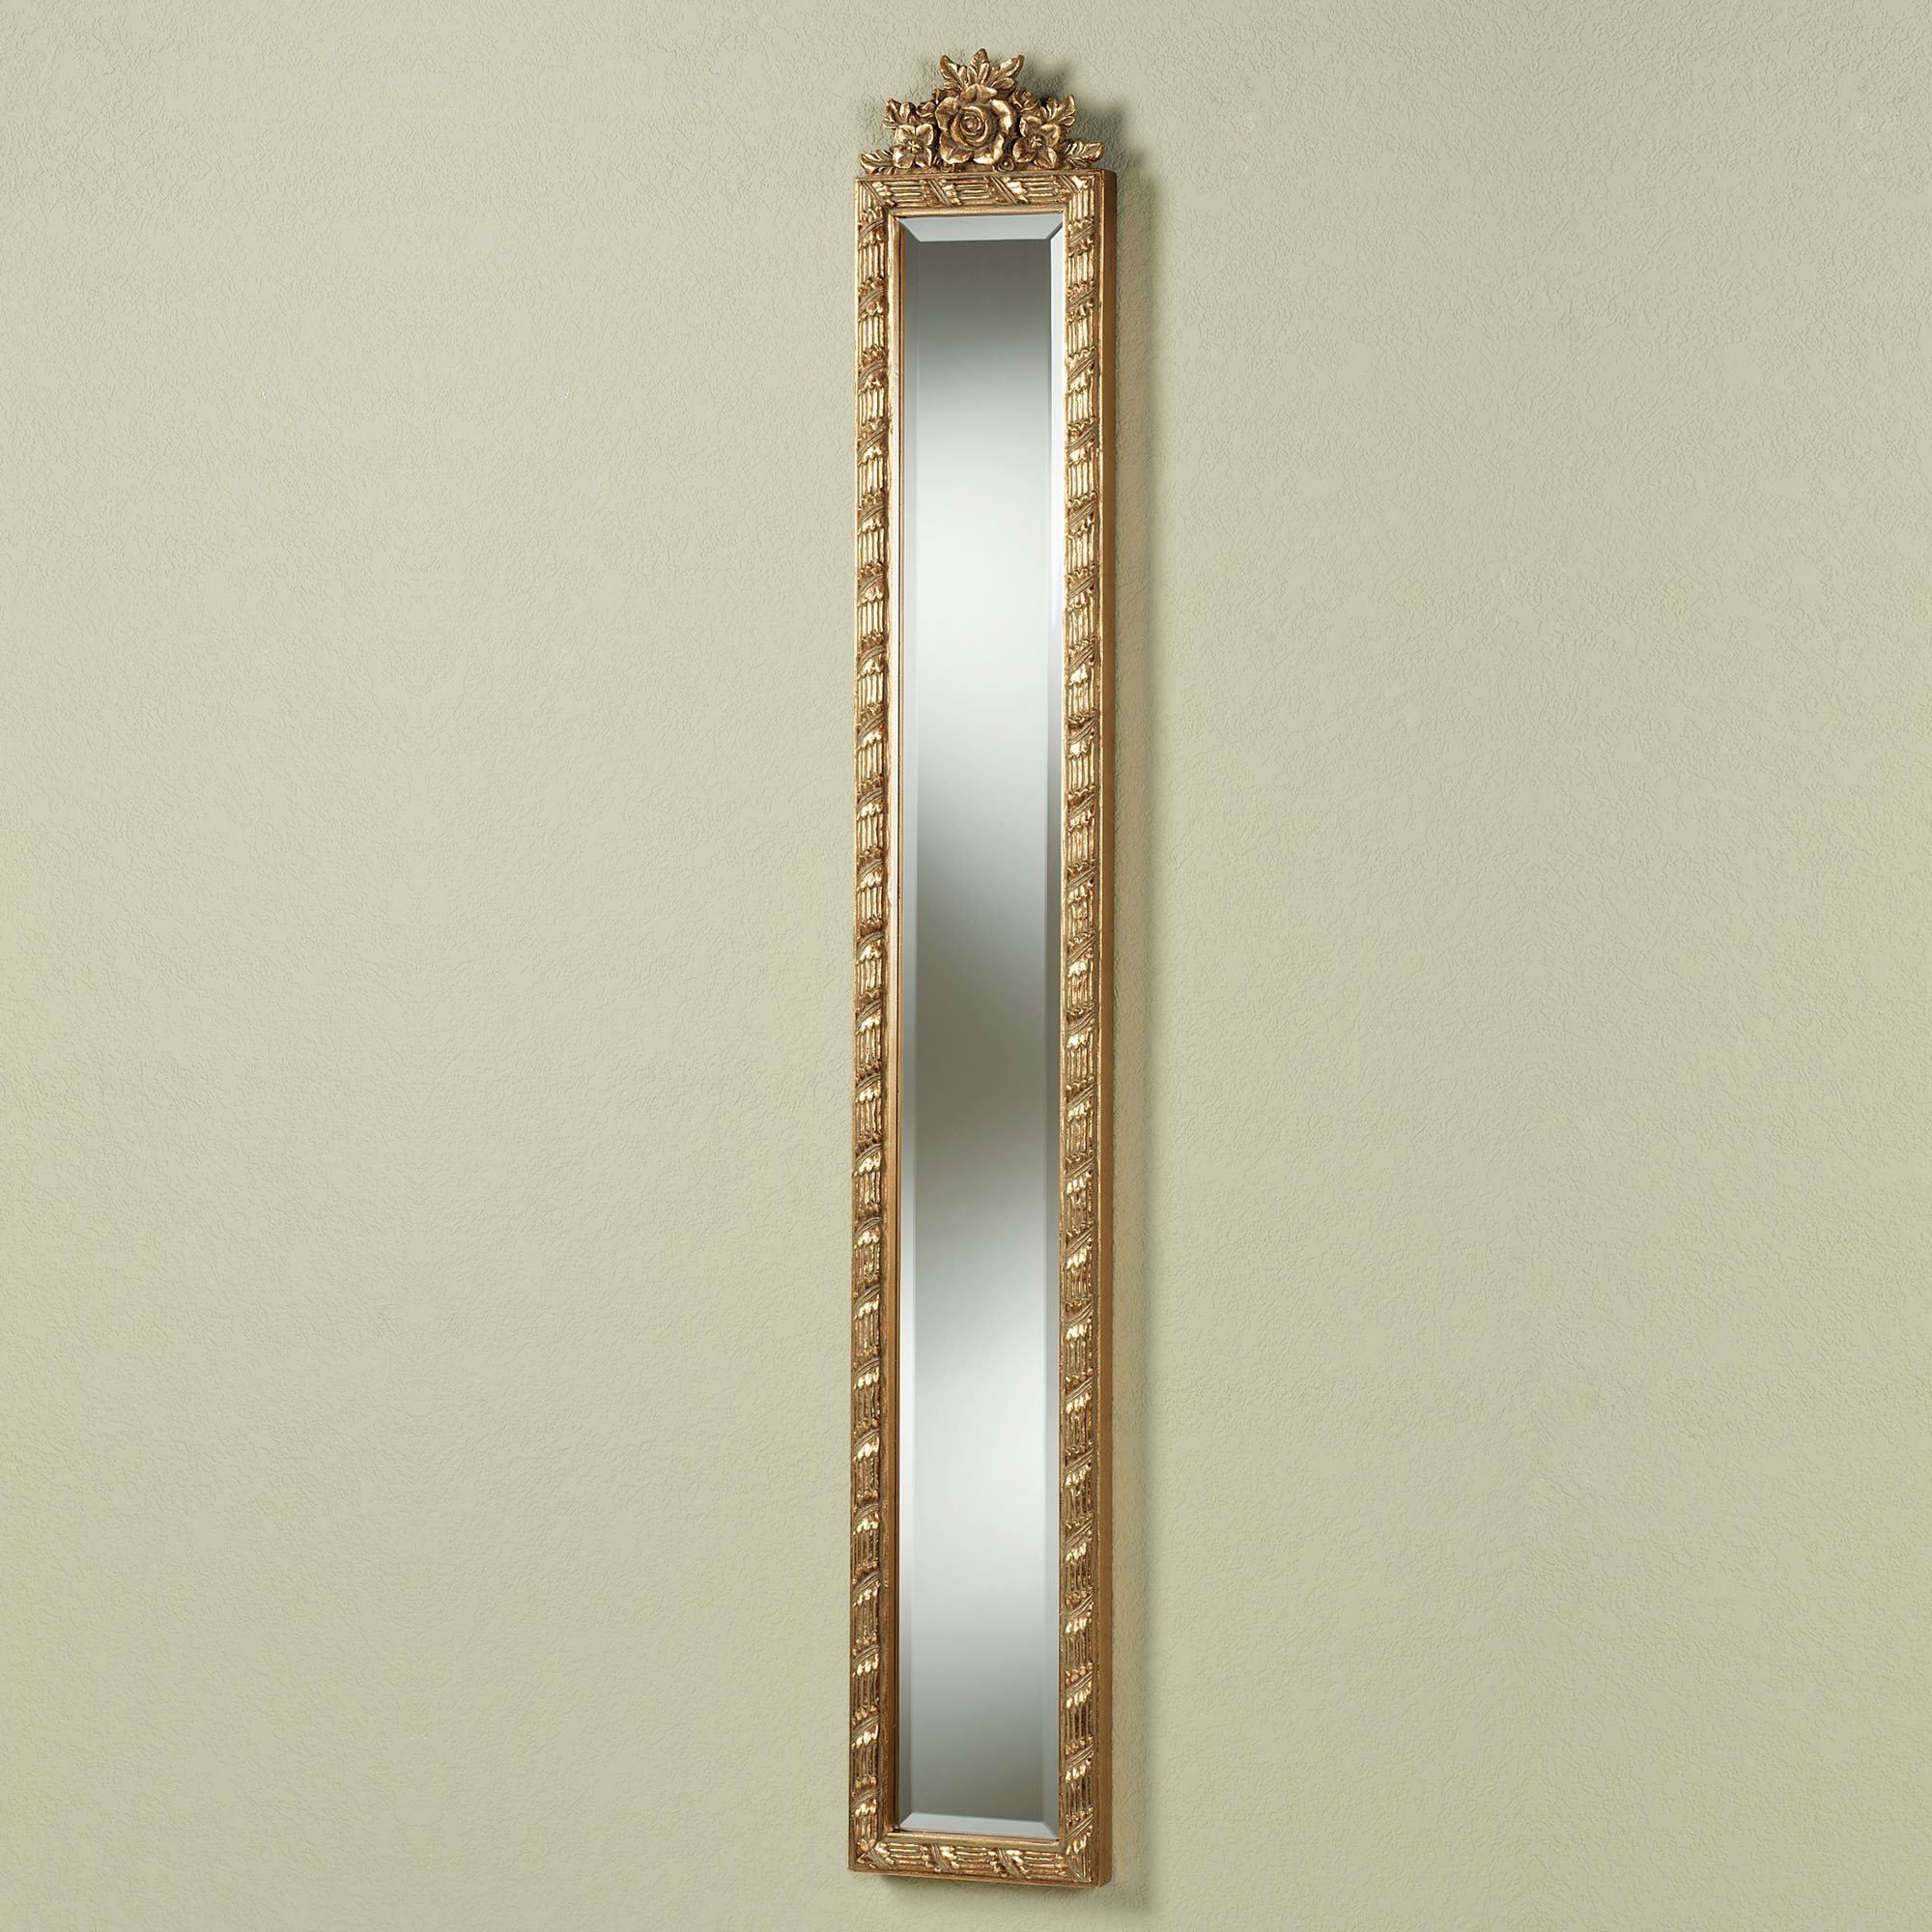 Most Popular Antique Wall Mirrors With Giuliana Antique Gold Floral Wall Mirror Panel (View 13 of 20)